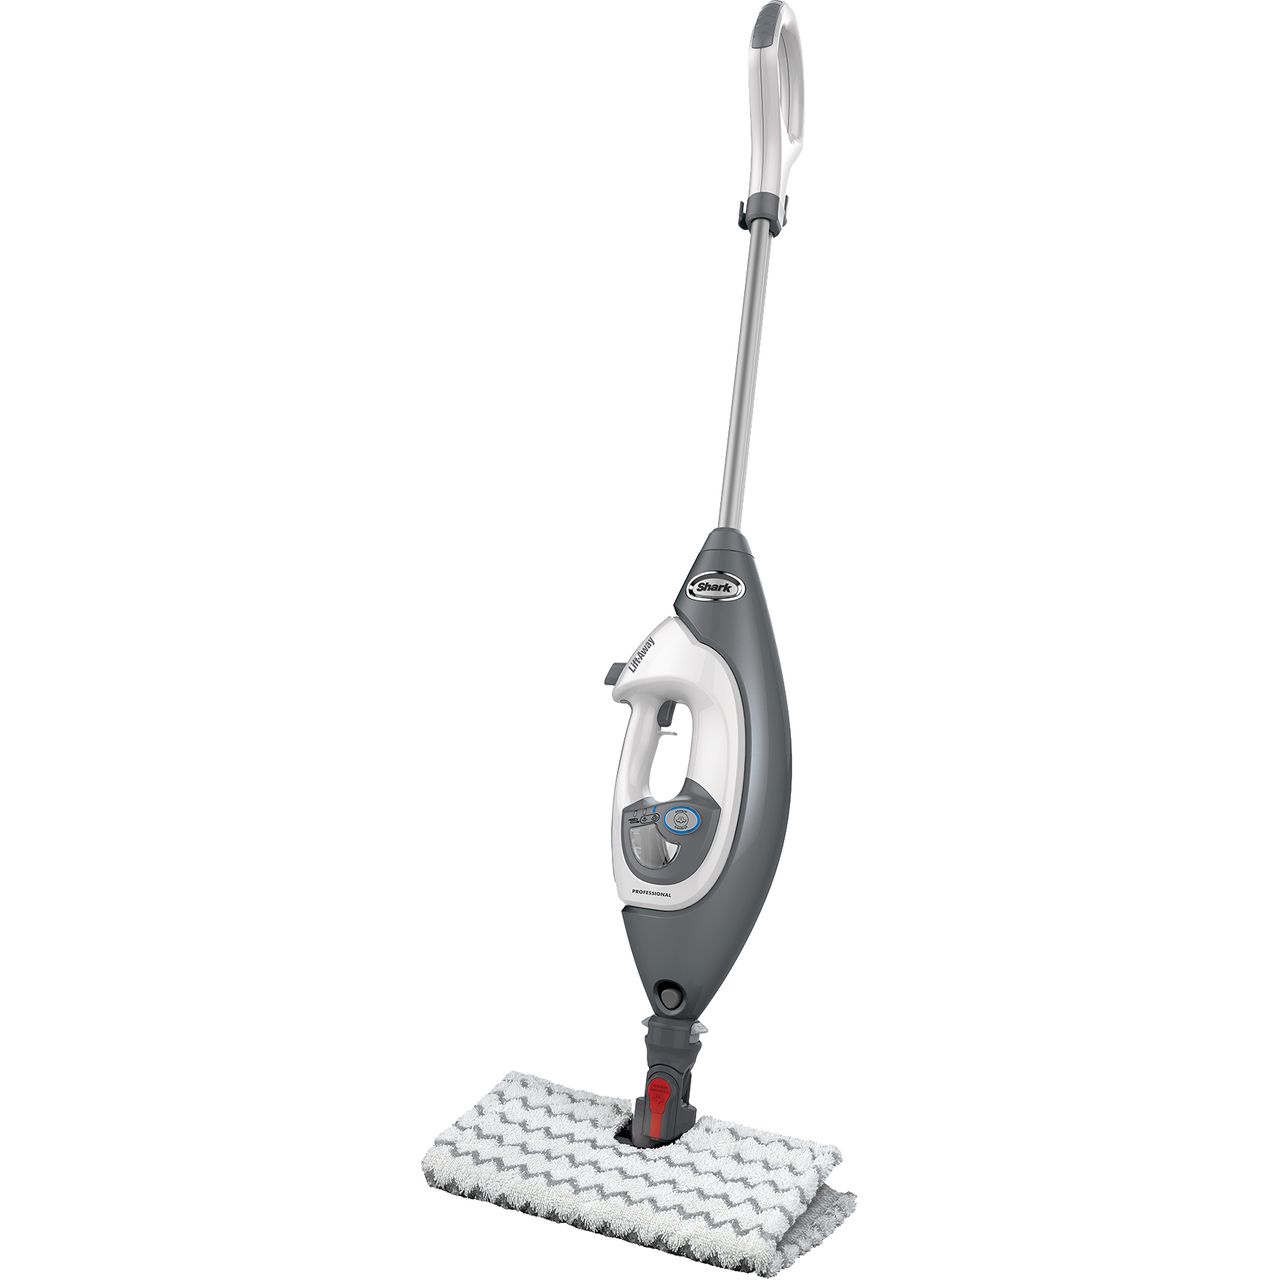 Shark Floor & Handheld S6005UK Steam Mop with Detachable Handheld and up to 15 Minutes Run Time Review